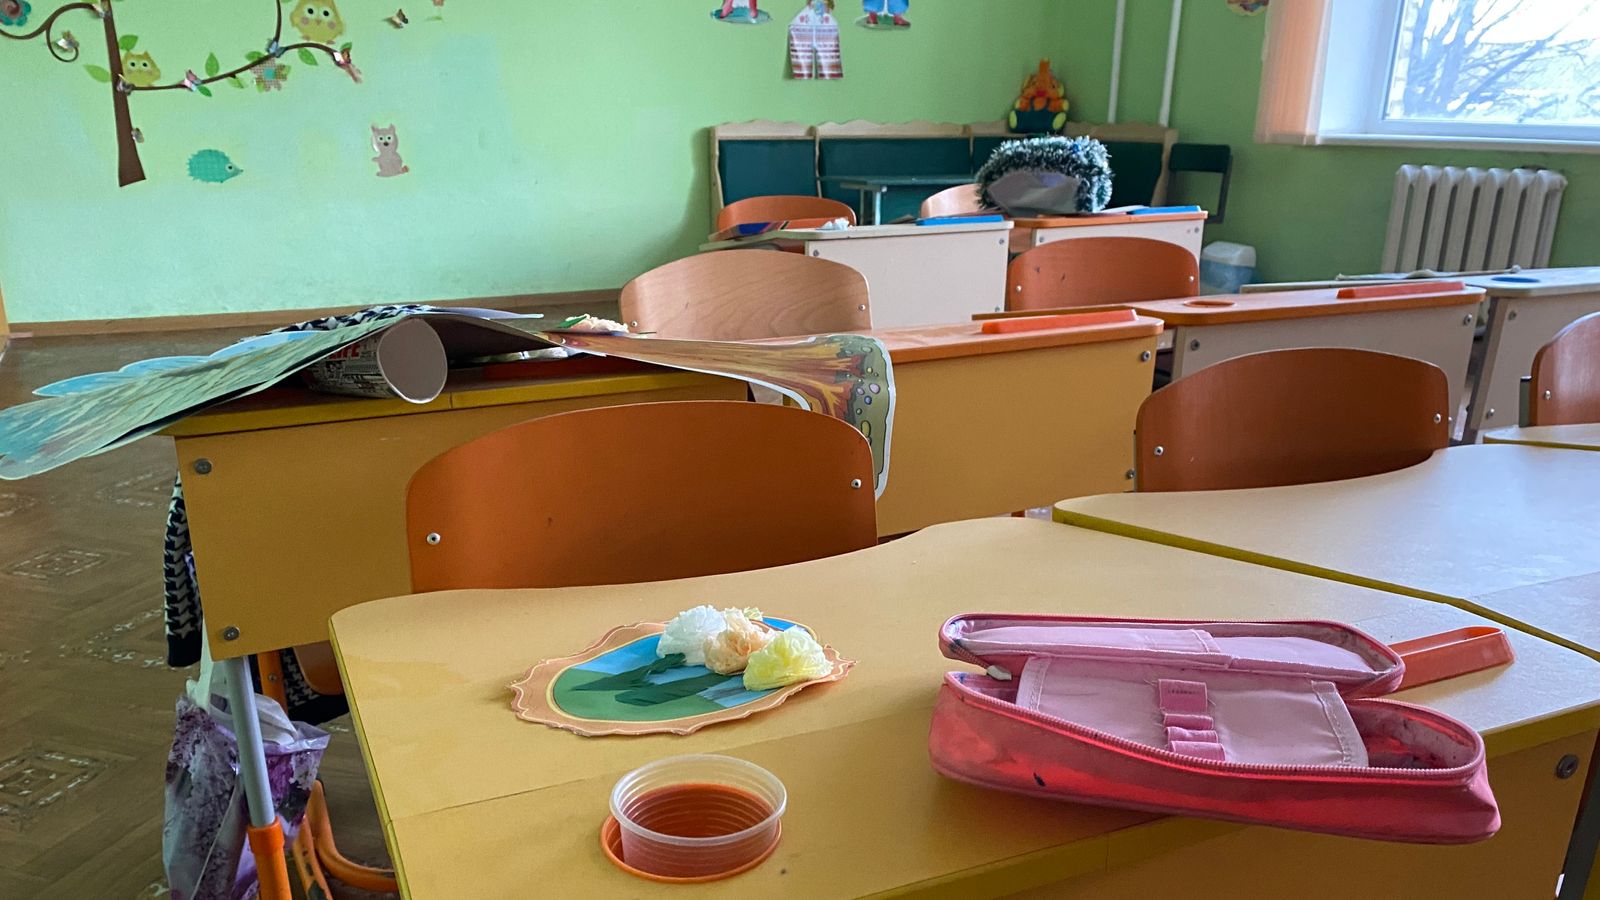 Ukraine war: School frozen in time after it was used as bomb shelter during nine months of fear